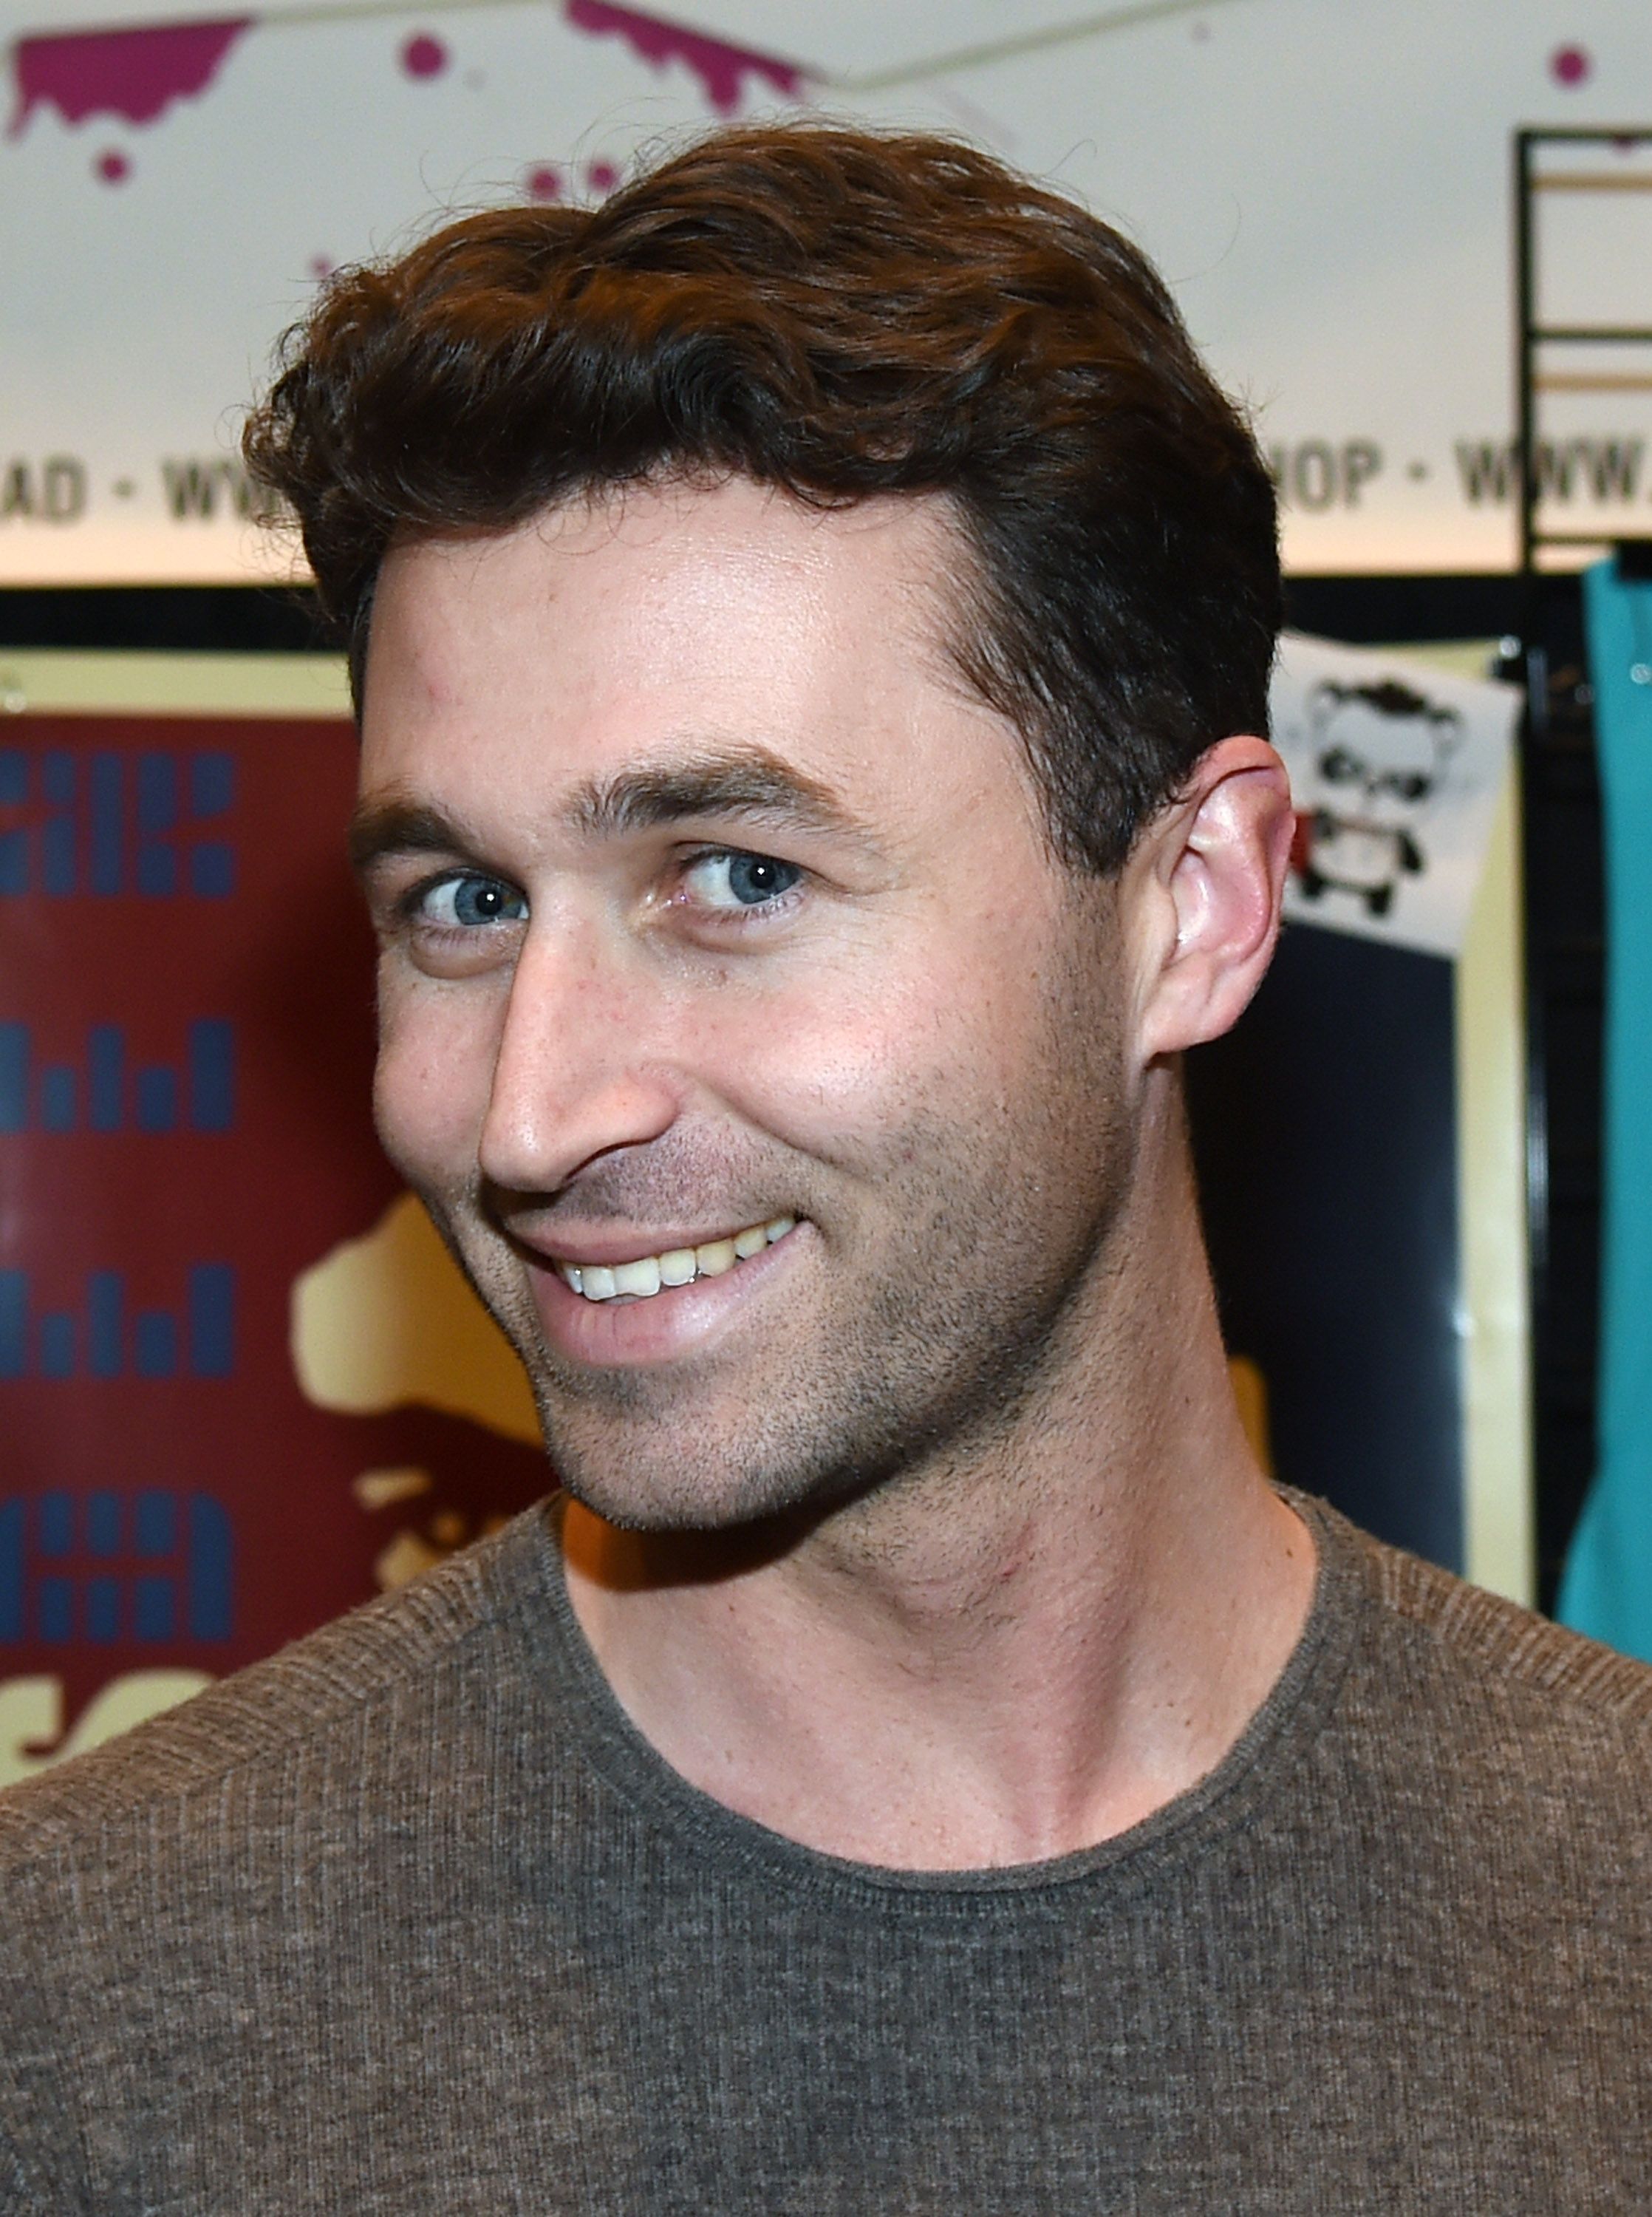 Porn Star James Deen Tweets About Addiction Troubles On The 1 Year Anniversary Of Kicking Smoking Habit IBTimes